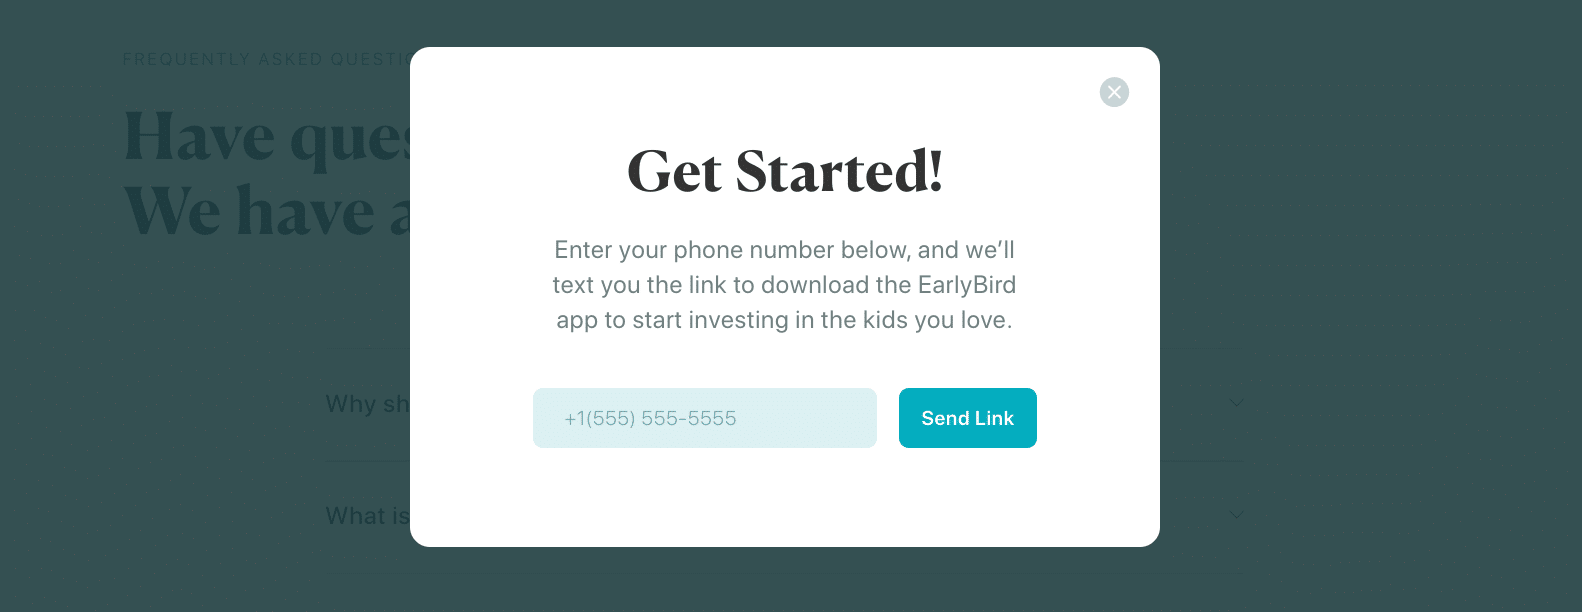 EarlyBird Review: Sign Up Progress with Text